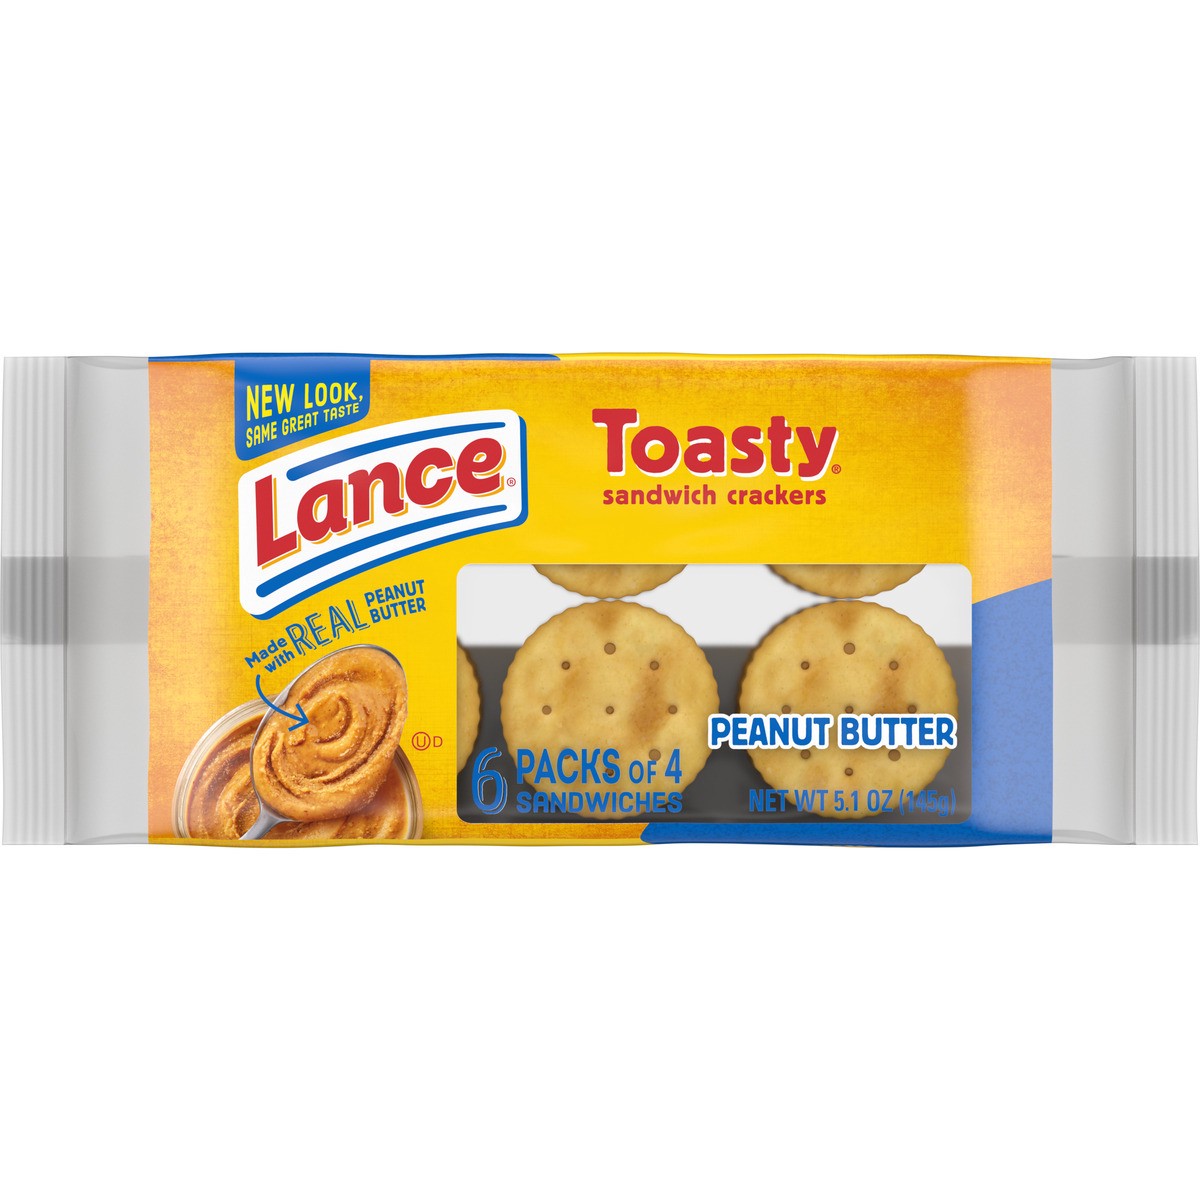 slide 6 of 11, Lance Sandwich Crackers, Toasty Peanut Butter, 6 Individually Wrapped Packs, 4 Sandwiches Each, 5.1 oz